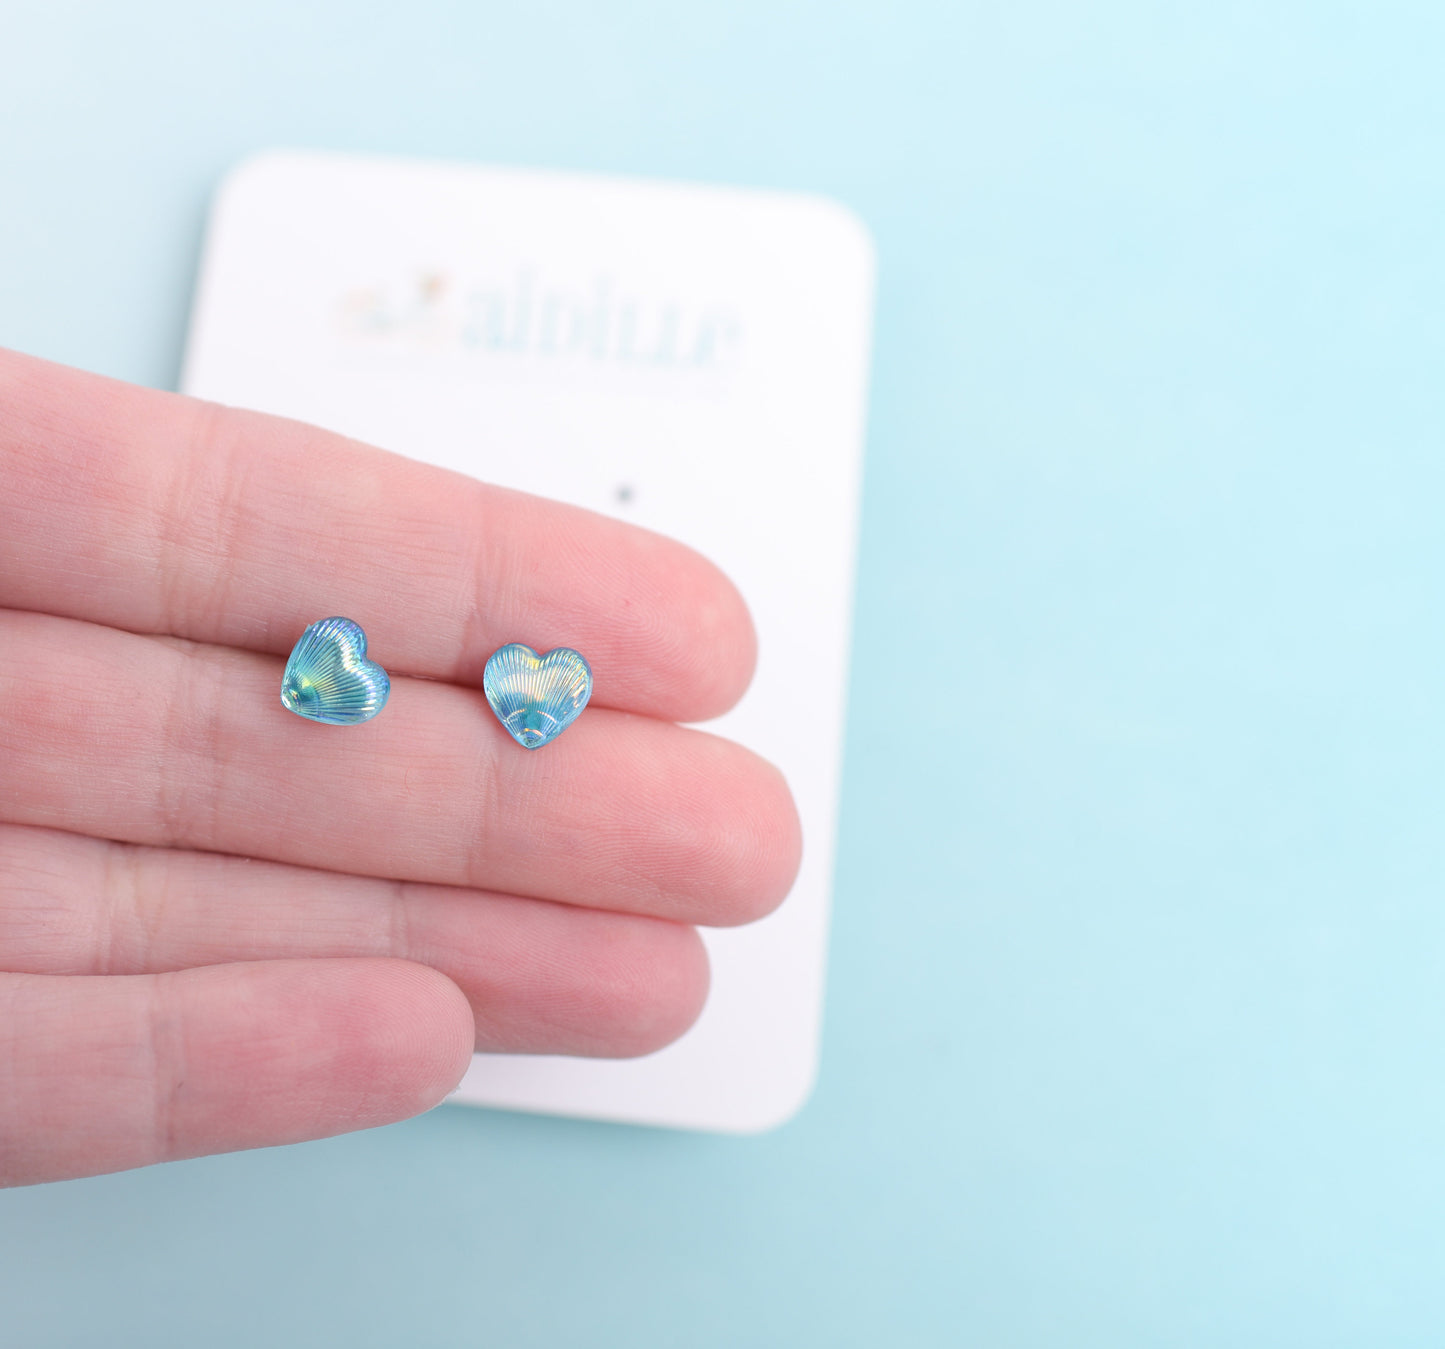 Shimmer Mini Heart Earring Trio with Titanium Posts